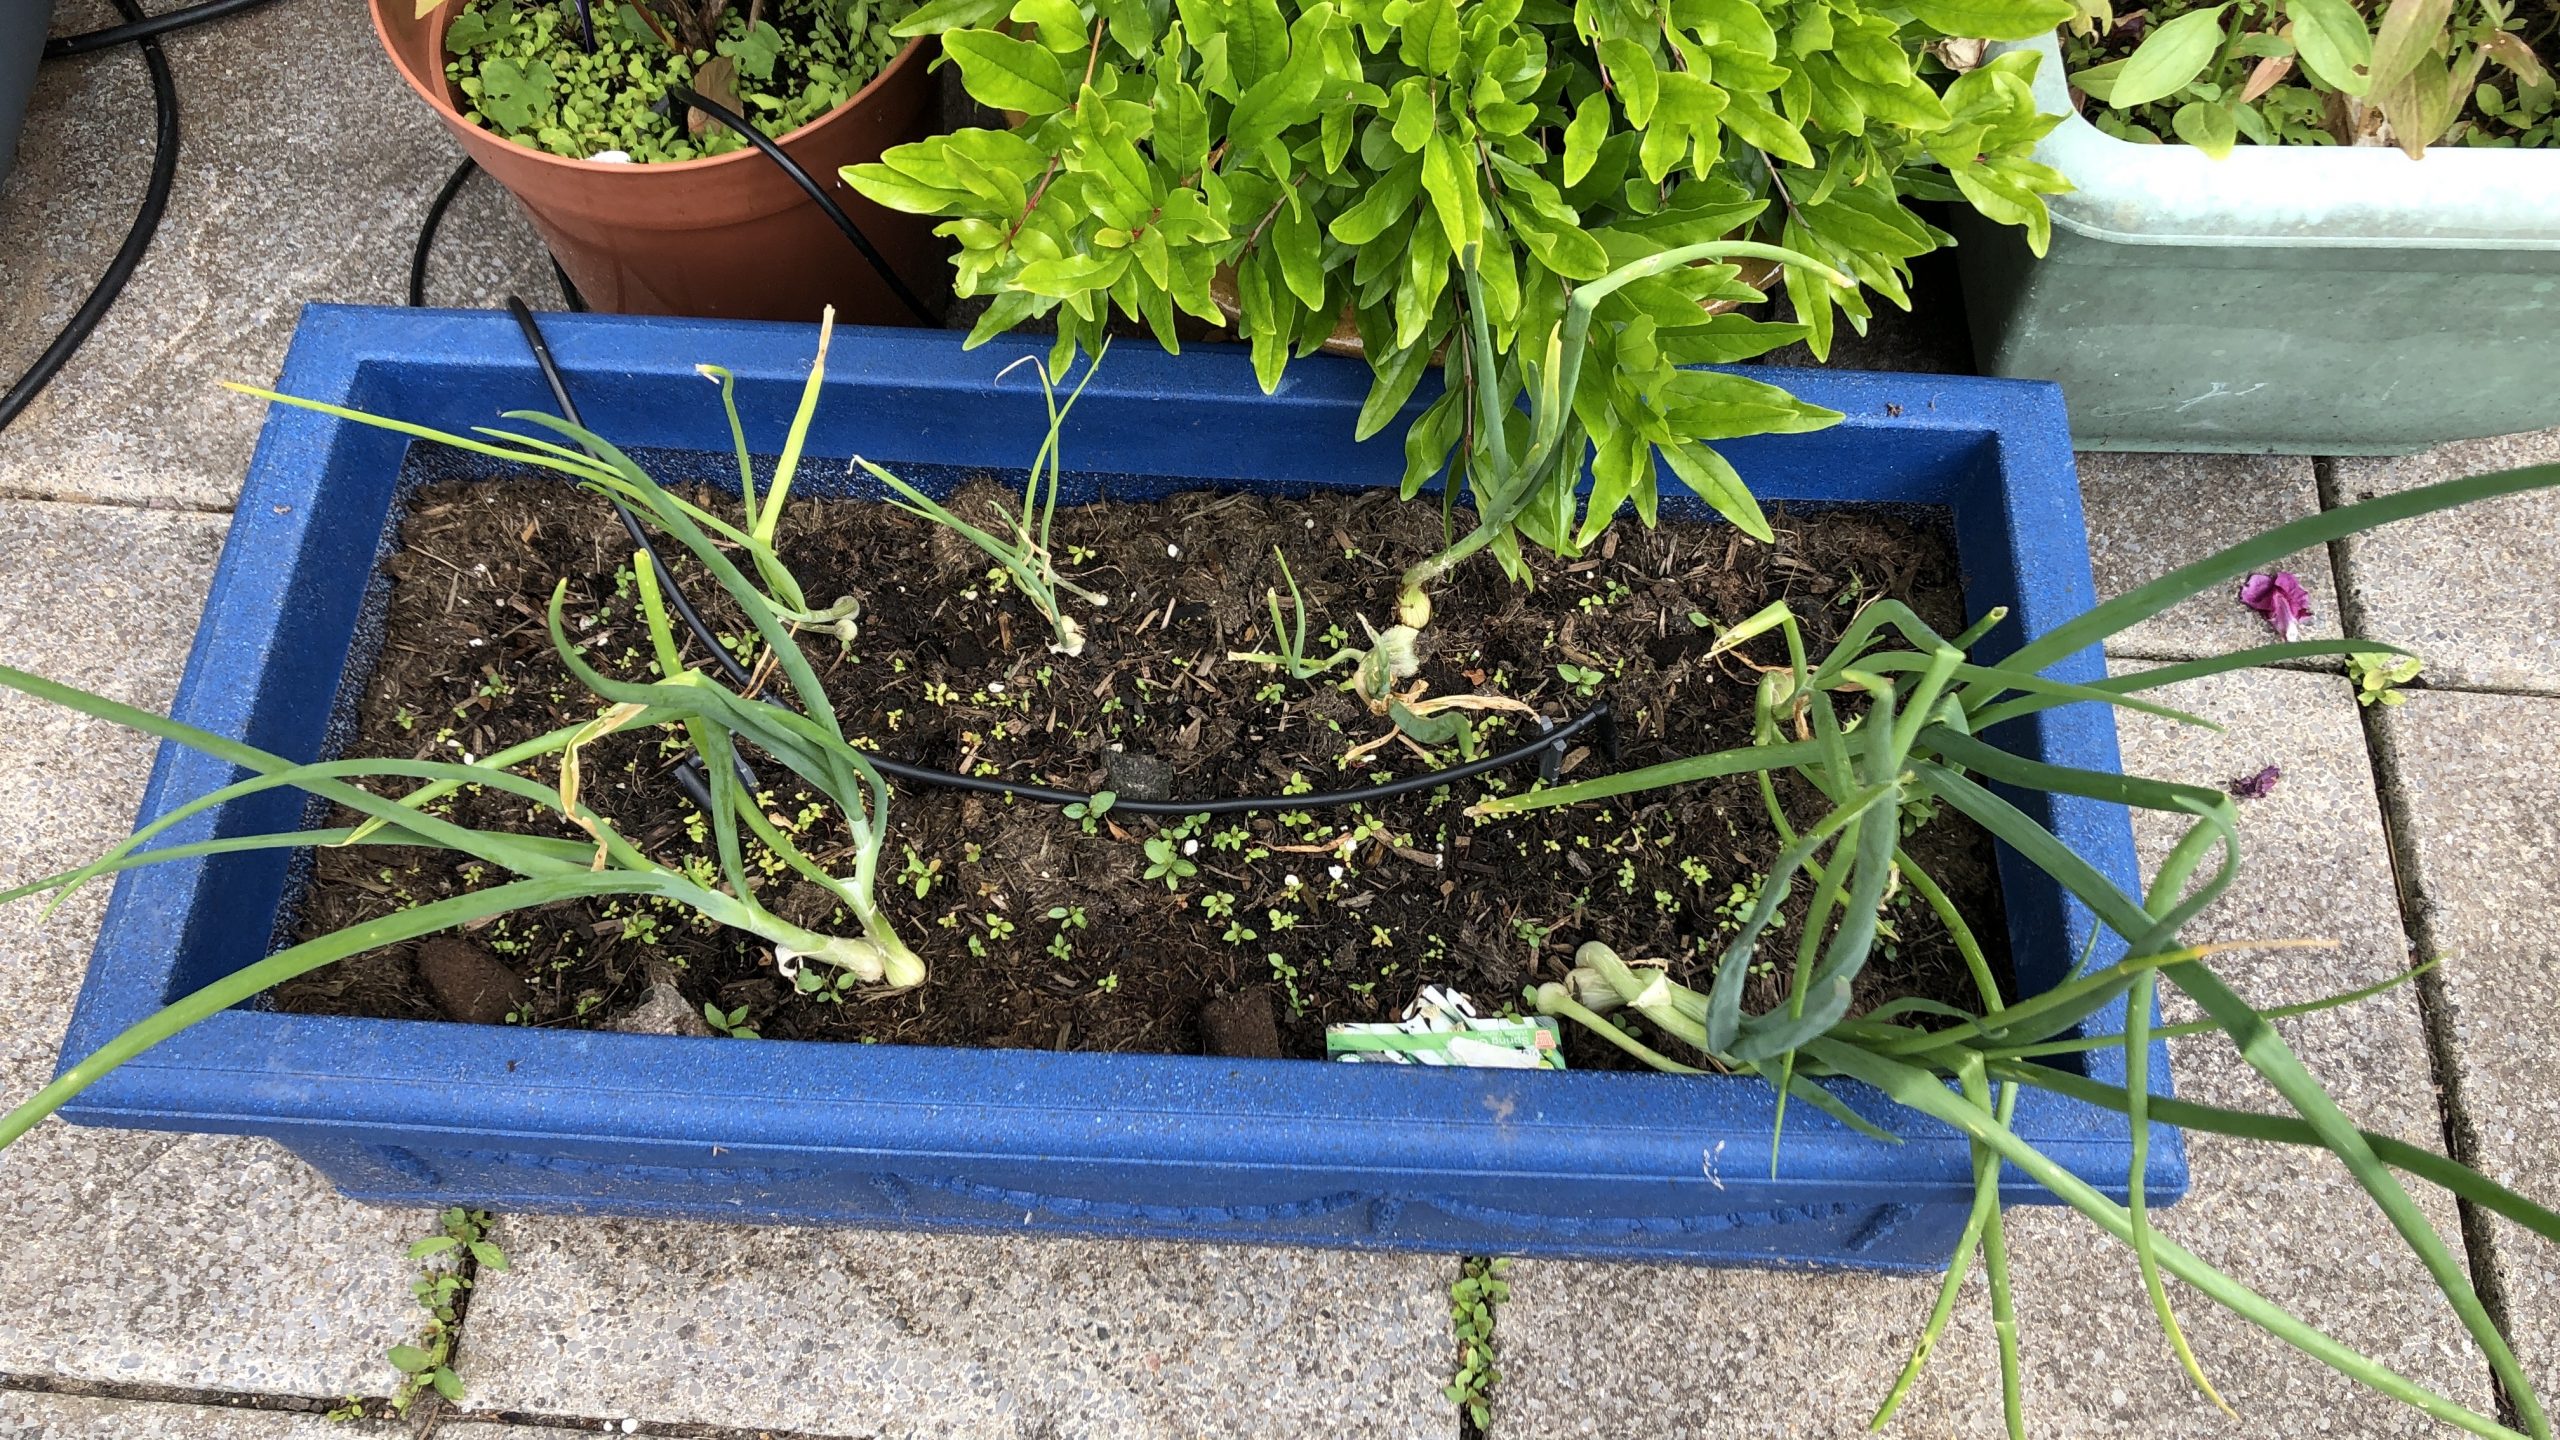 Spring onions growing outdoors - 25/7/21